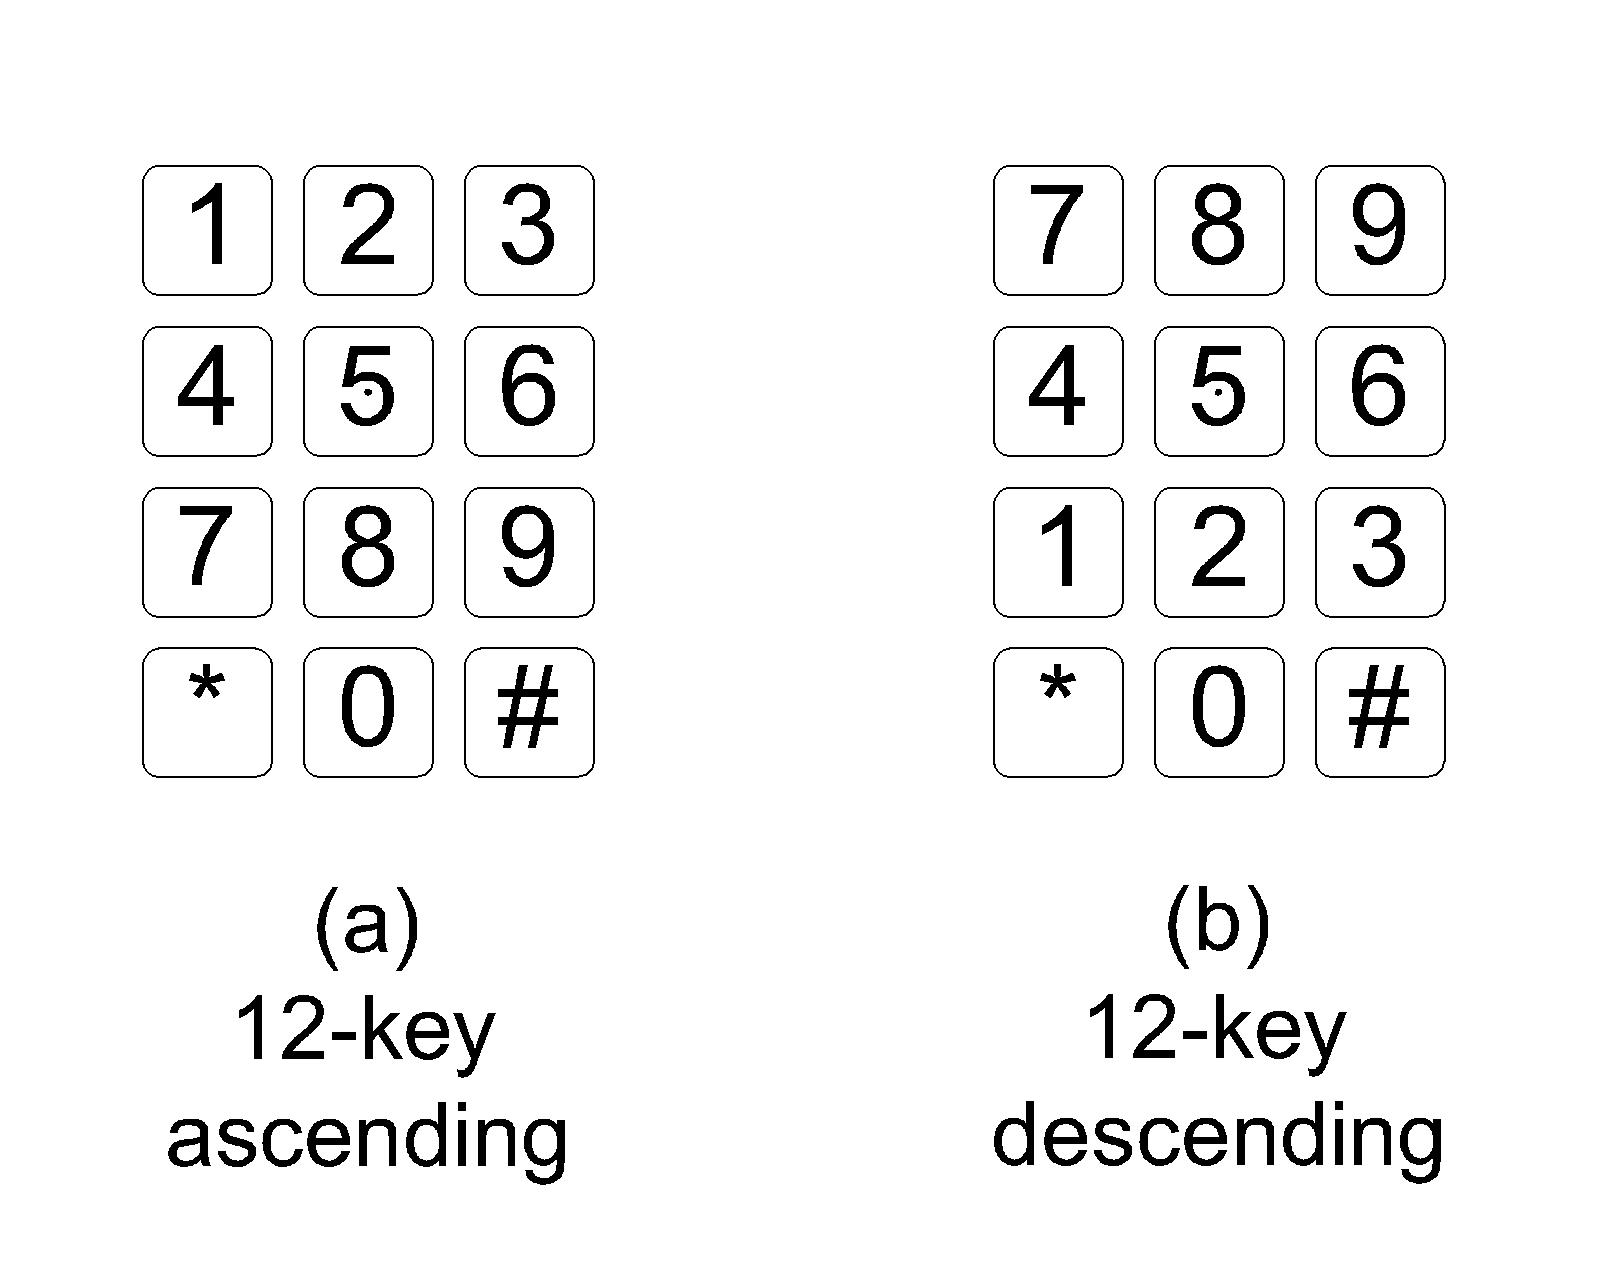 Figure (a) shows a 12-key ascending layout with “1” in the upper left corner, such as a telephone.Figure (b) shows a descending layout with “7” in the upper left corner, such as a computer numeric keypad.